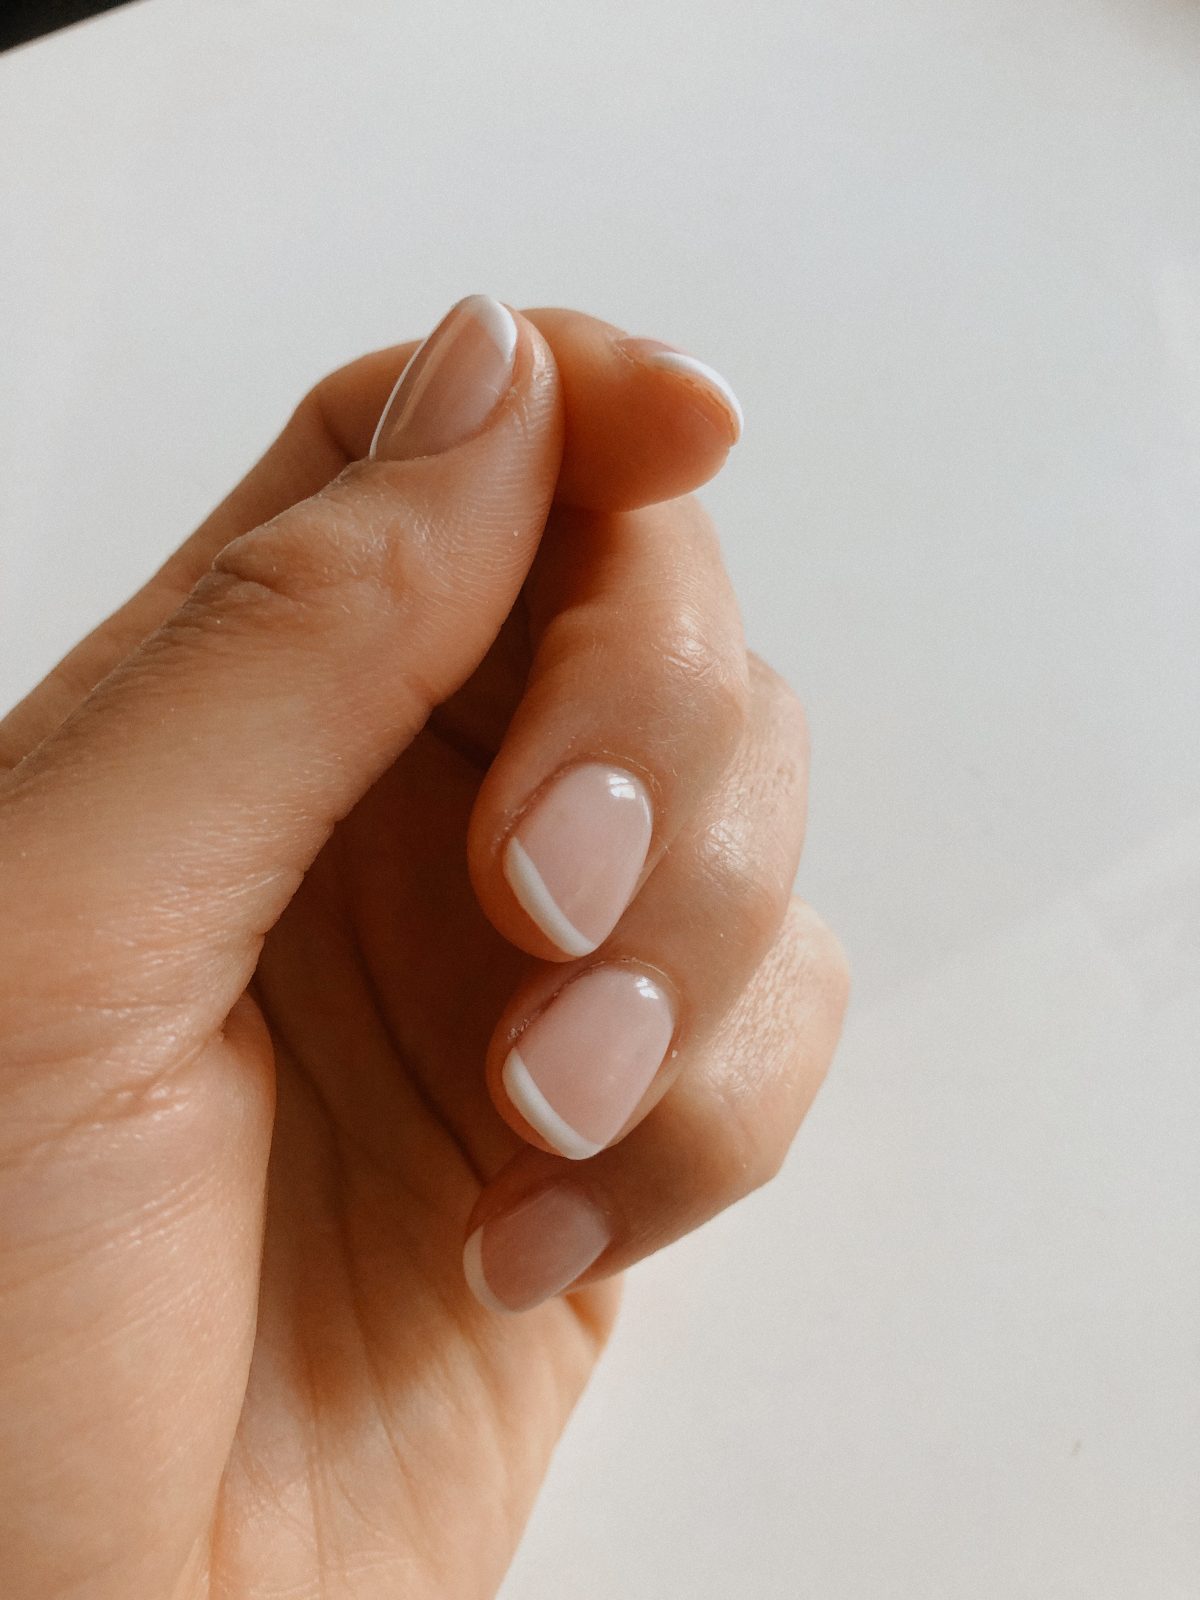 bio gel nails difference shellac healthier explained beauty non toxic kayla seah not your standard blog blogger lifestyle